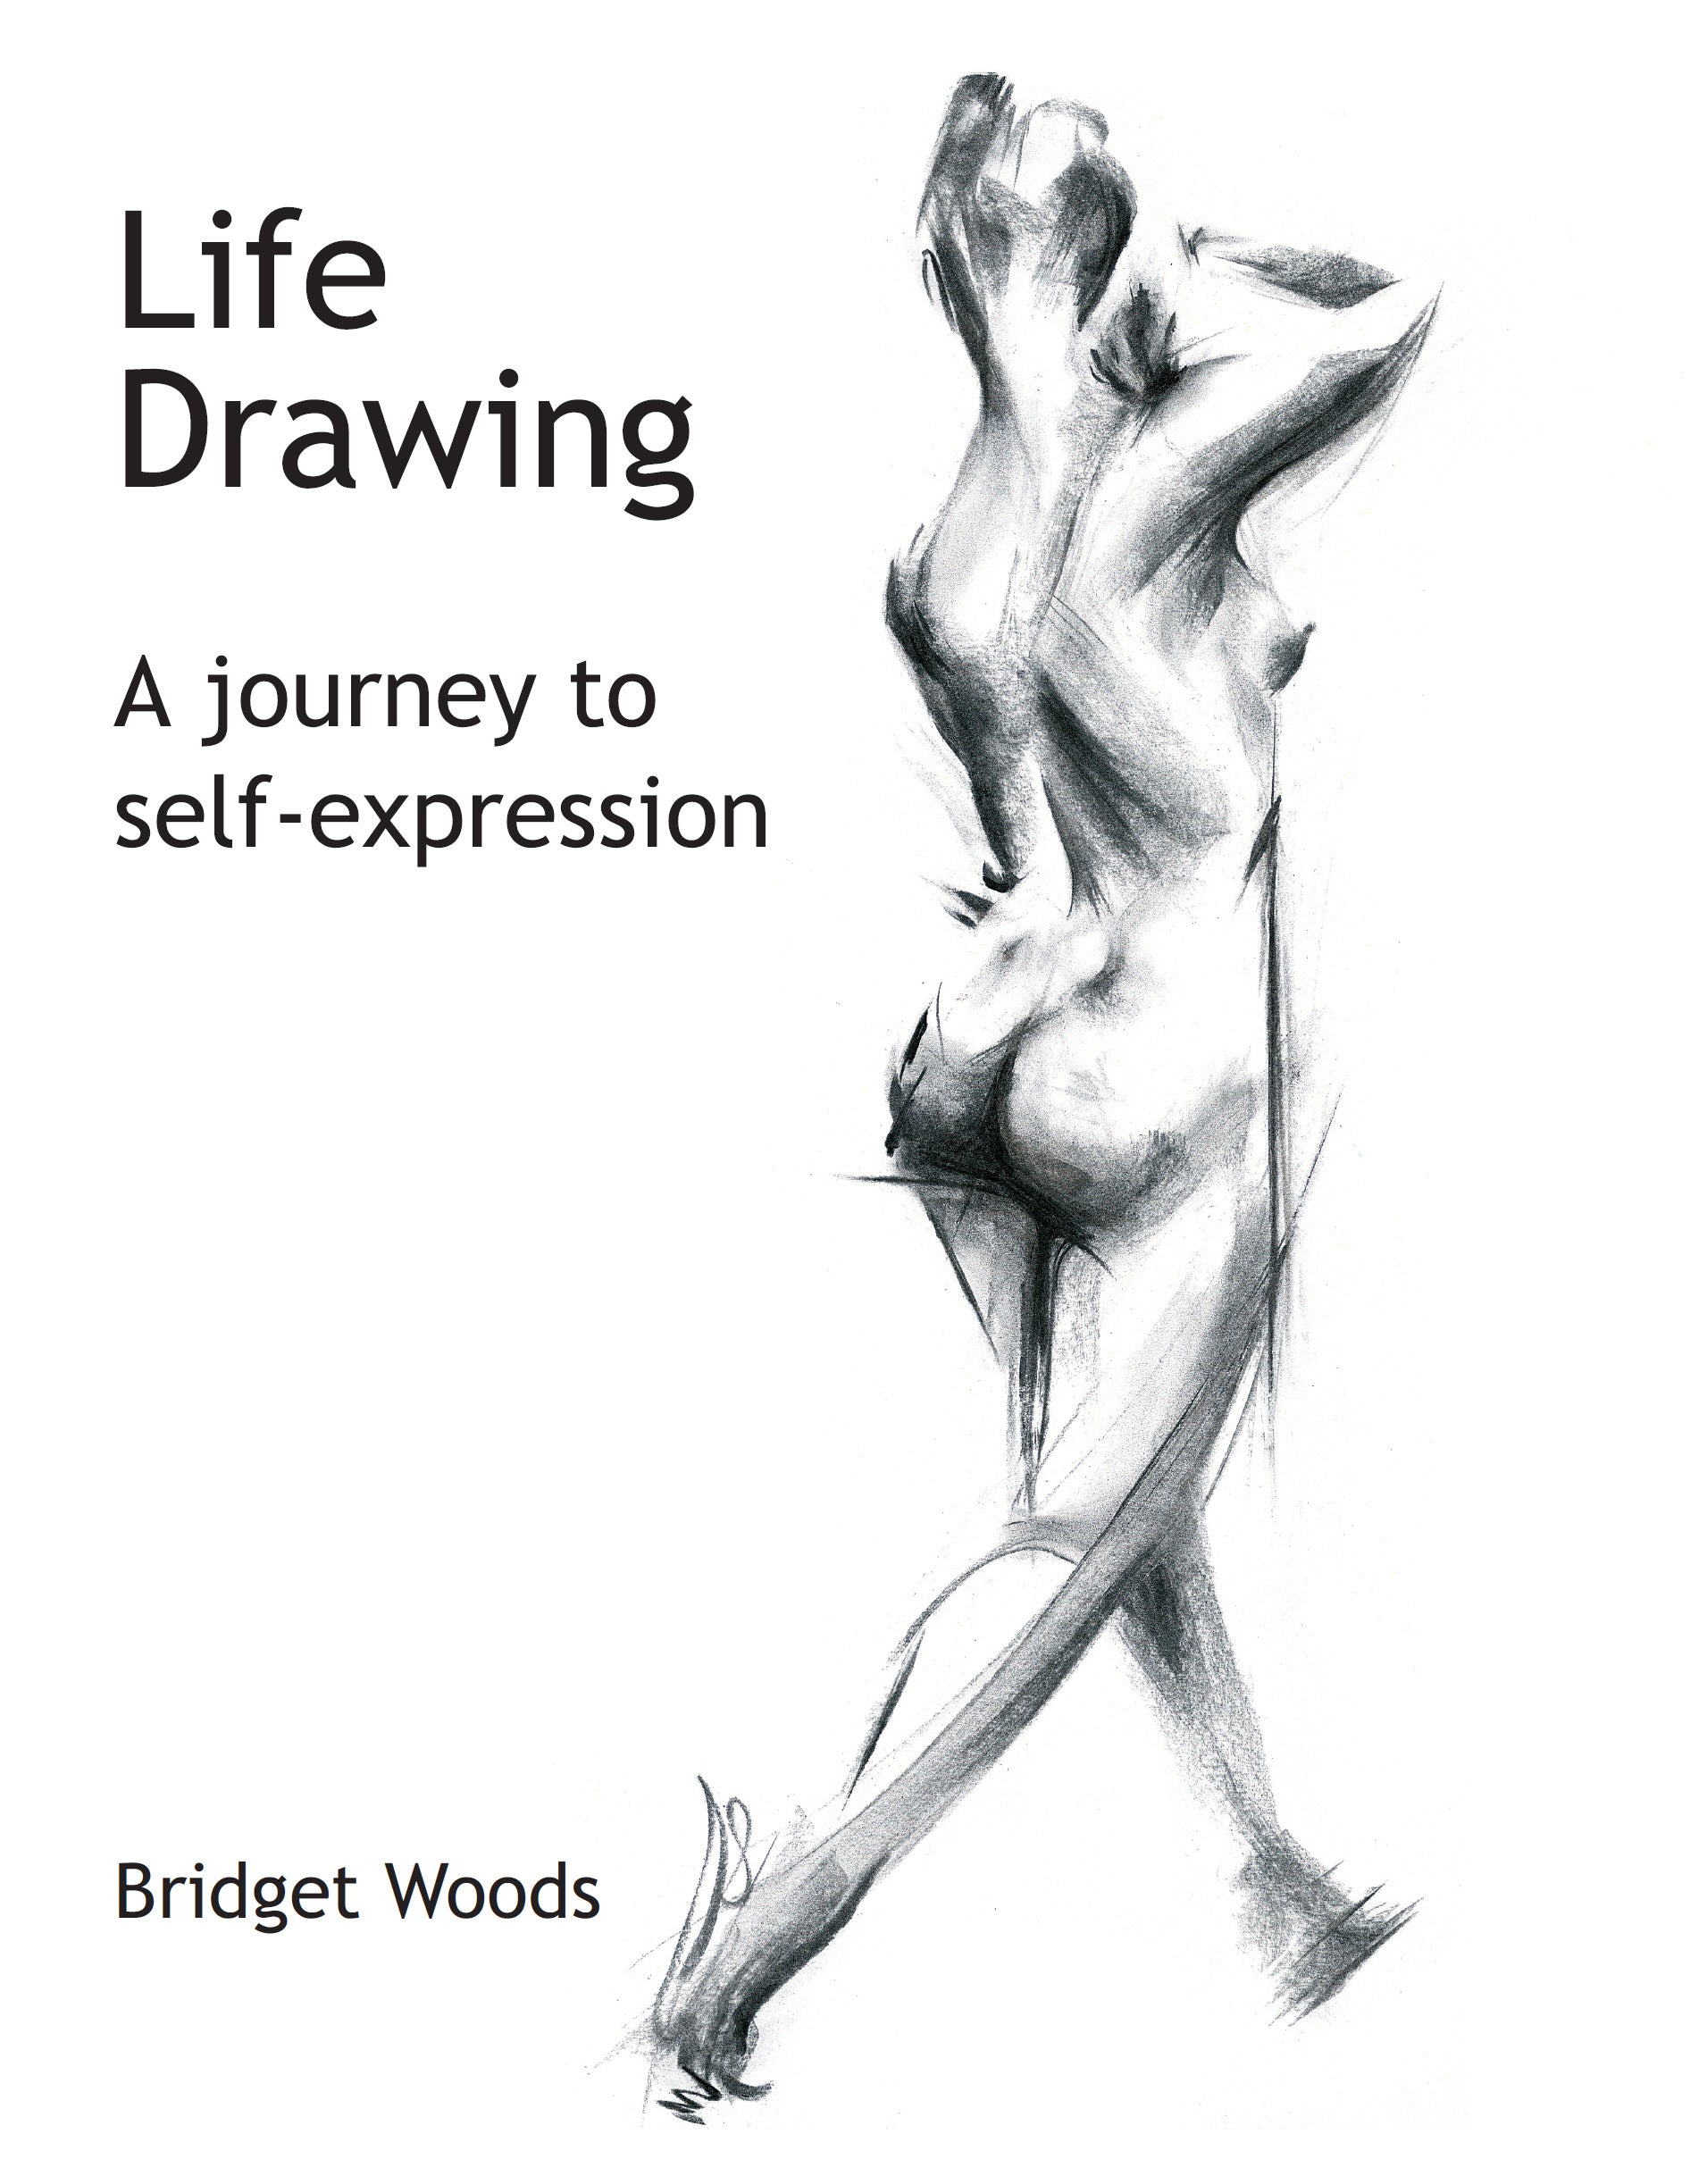 Life Drawing - A Journey To Self-Expression